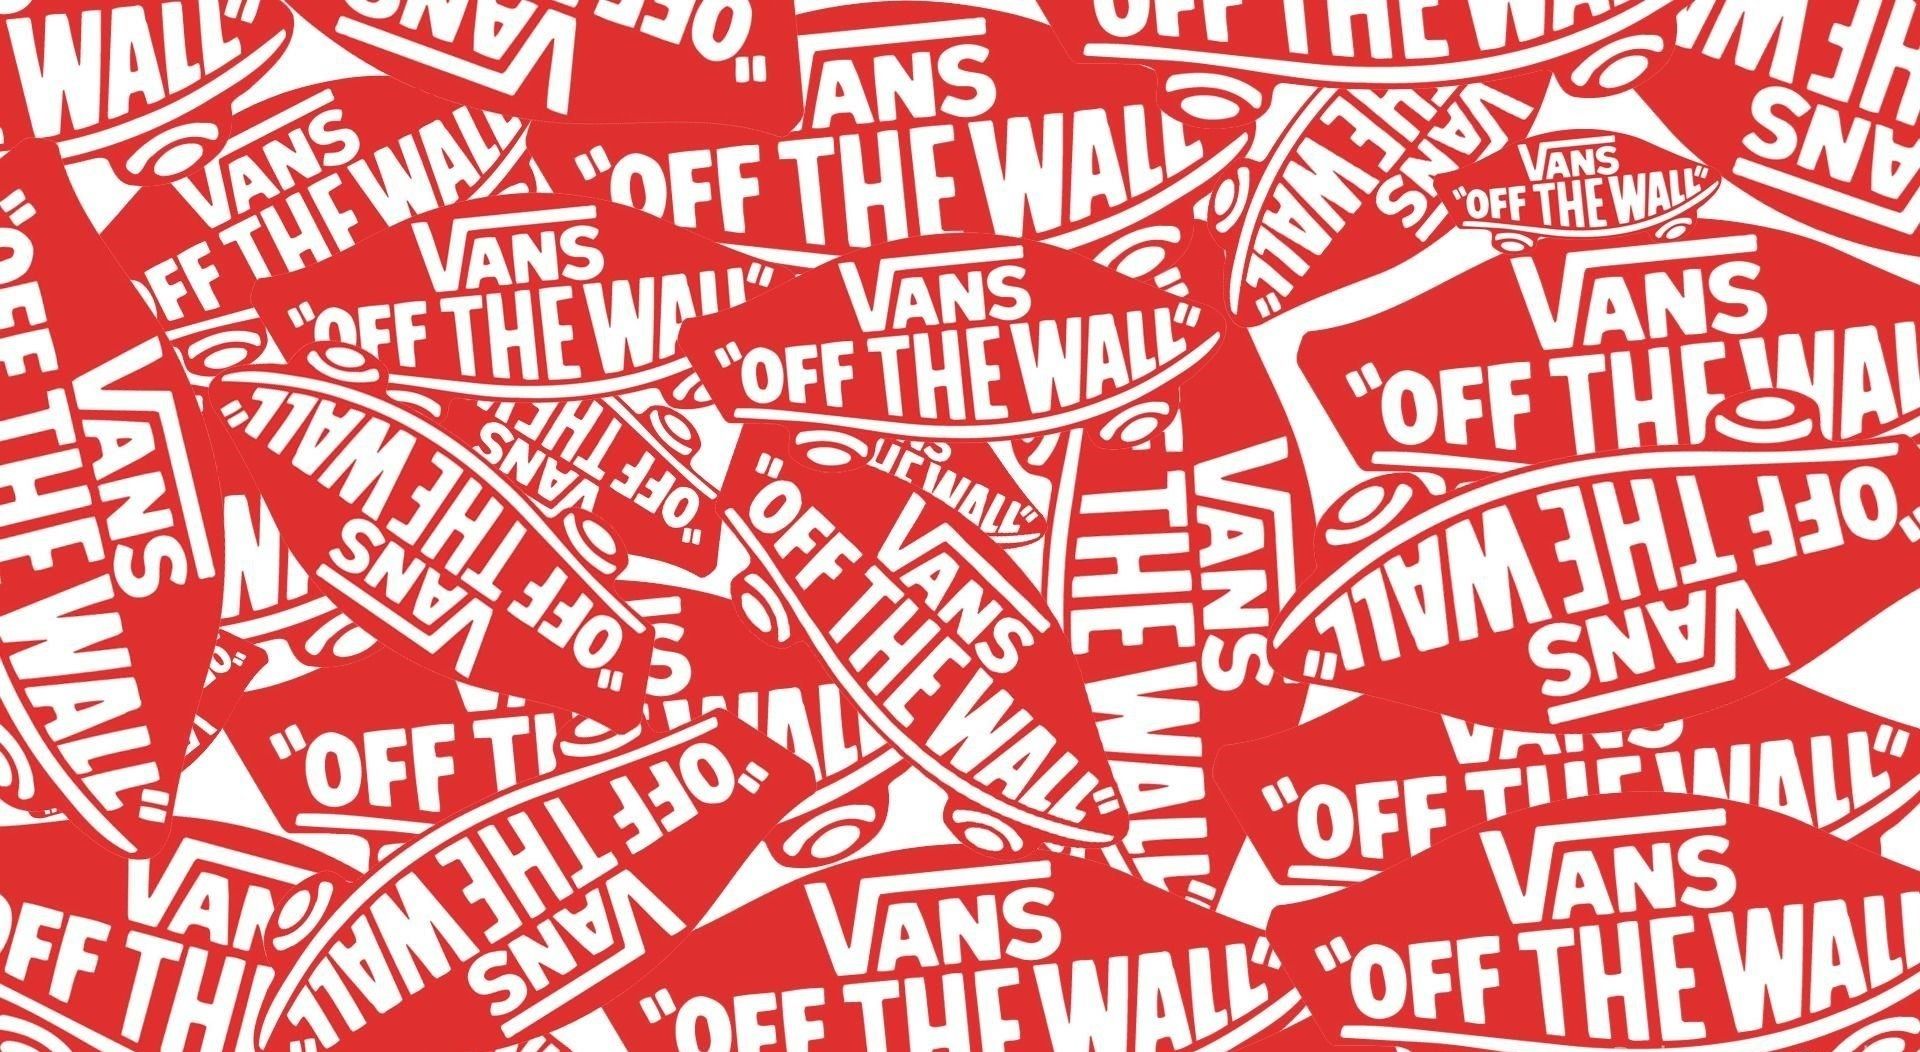 Vans off the wall wallpaper 1920x1080 for android - Vans